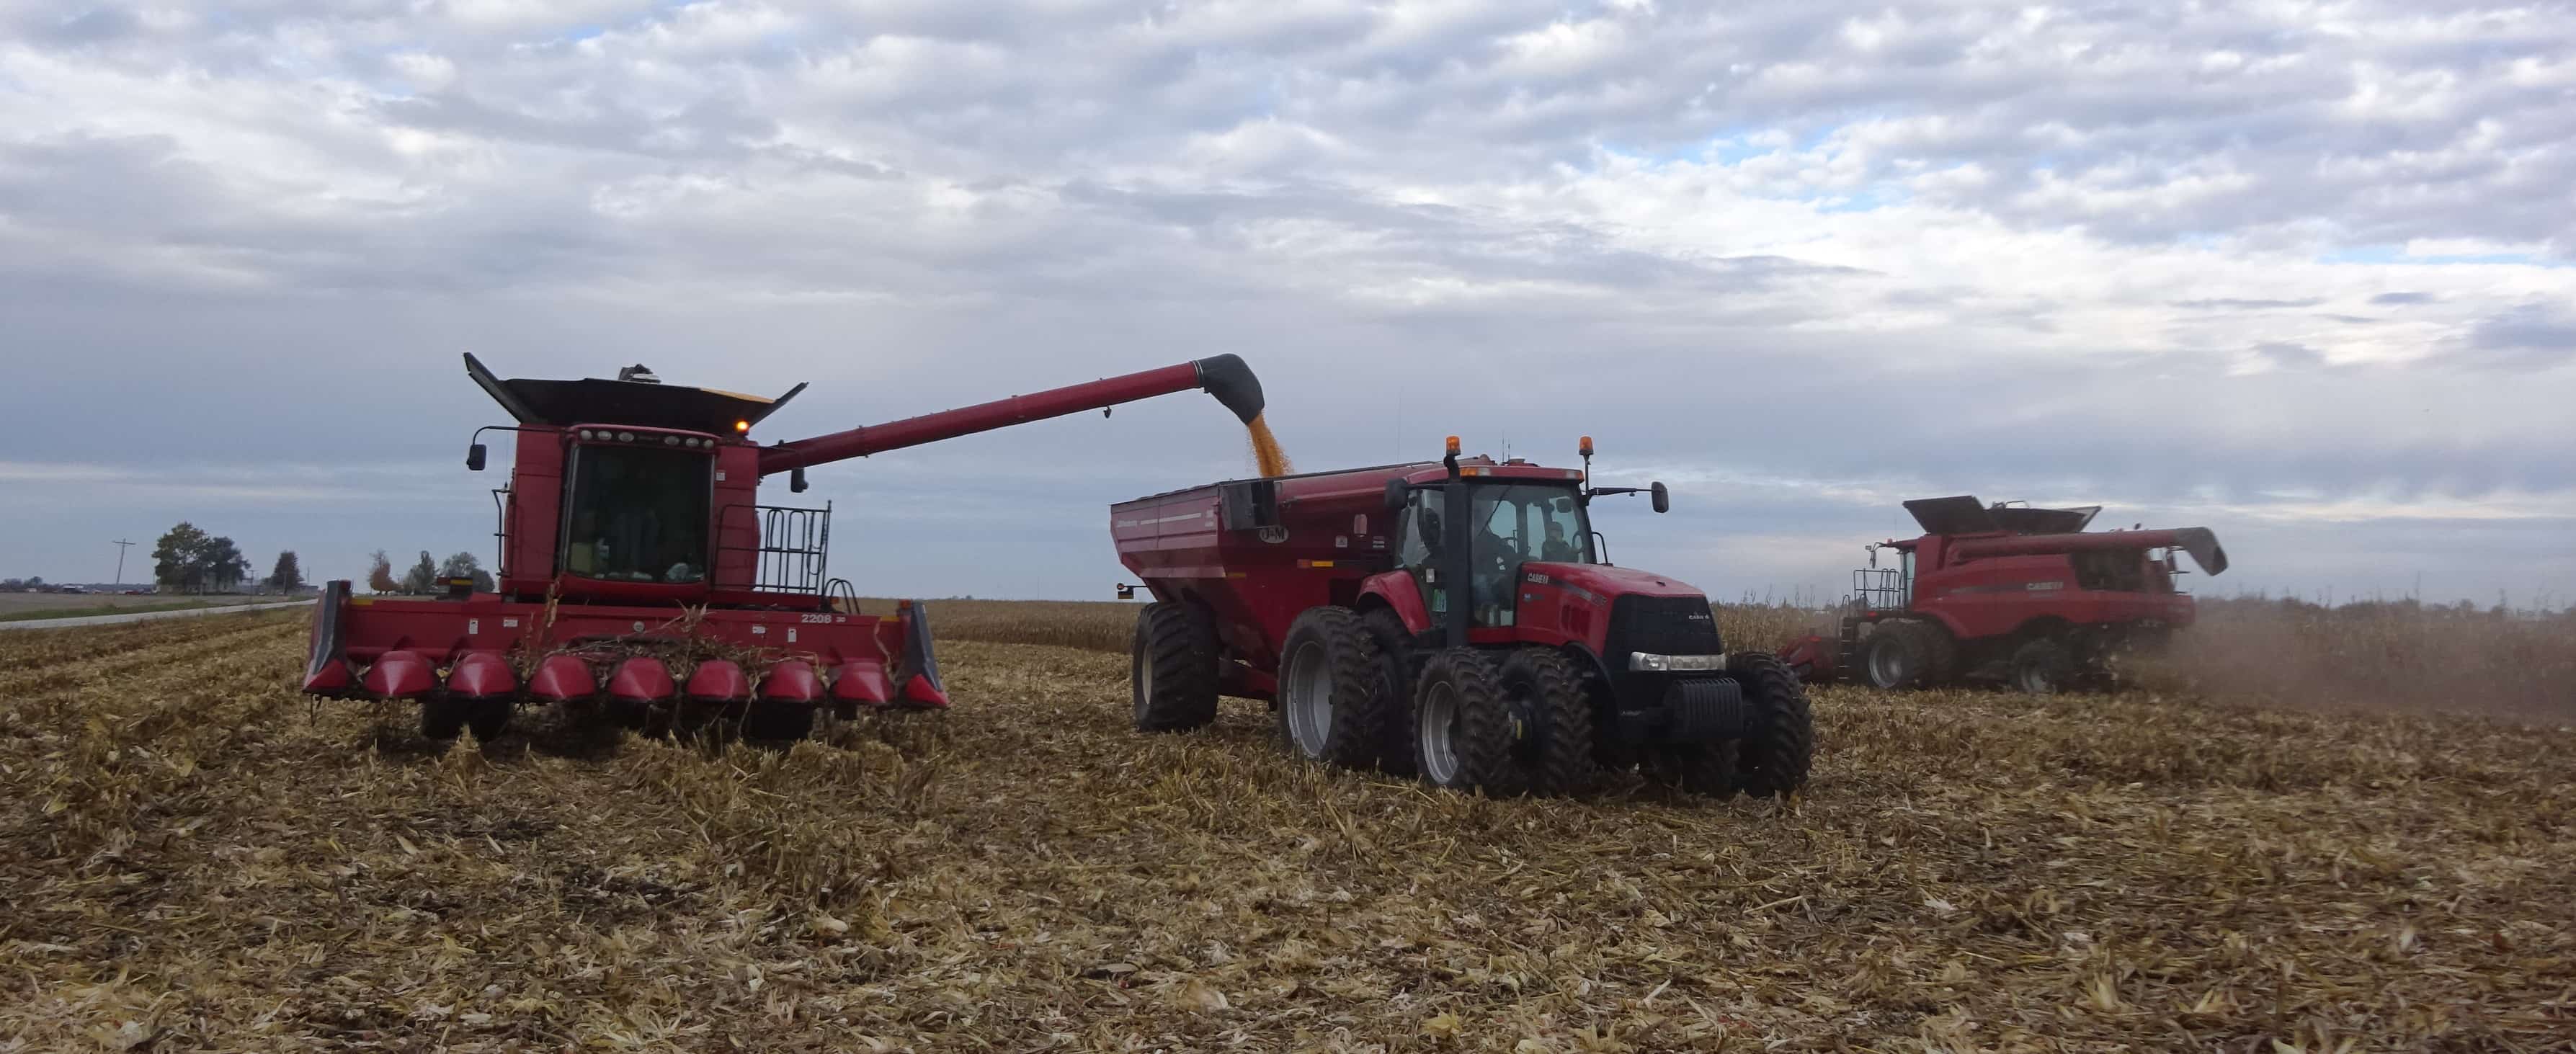 Two Case IH red combines, a red tractor and grain wagon in field harvesting corn